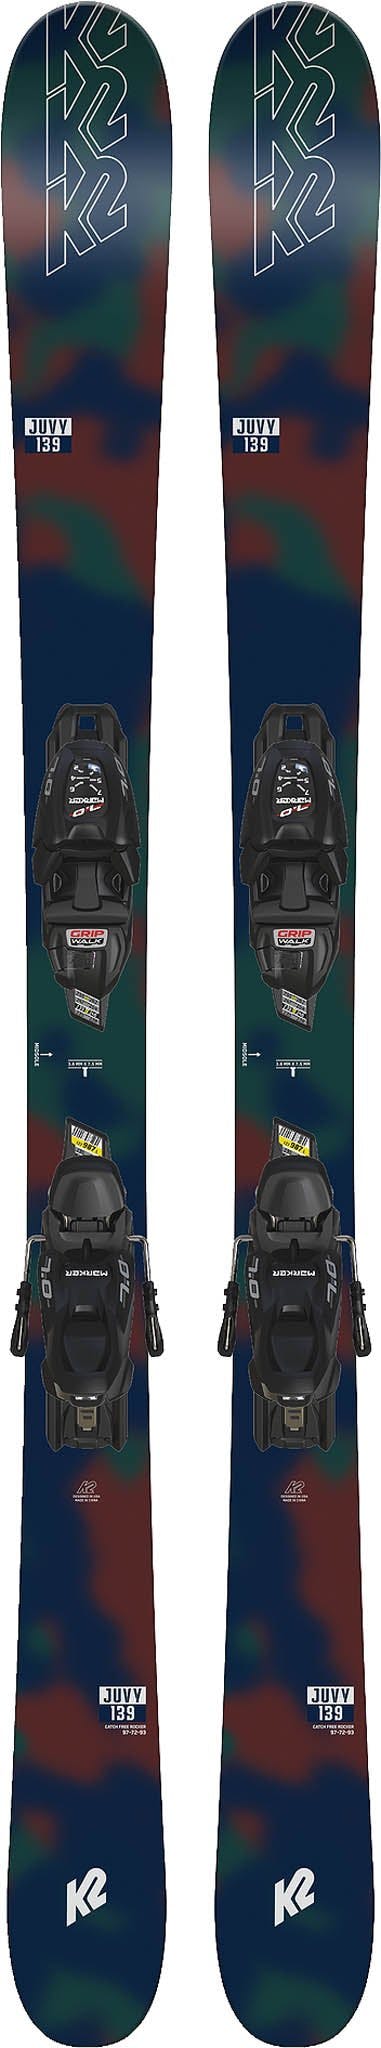 Product image for Juvy 7.0 Fdt Ski - Youth